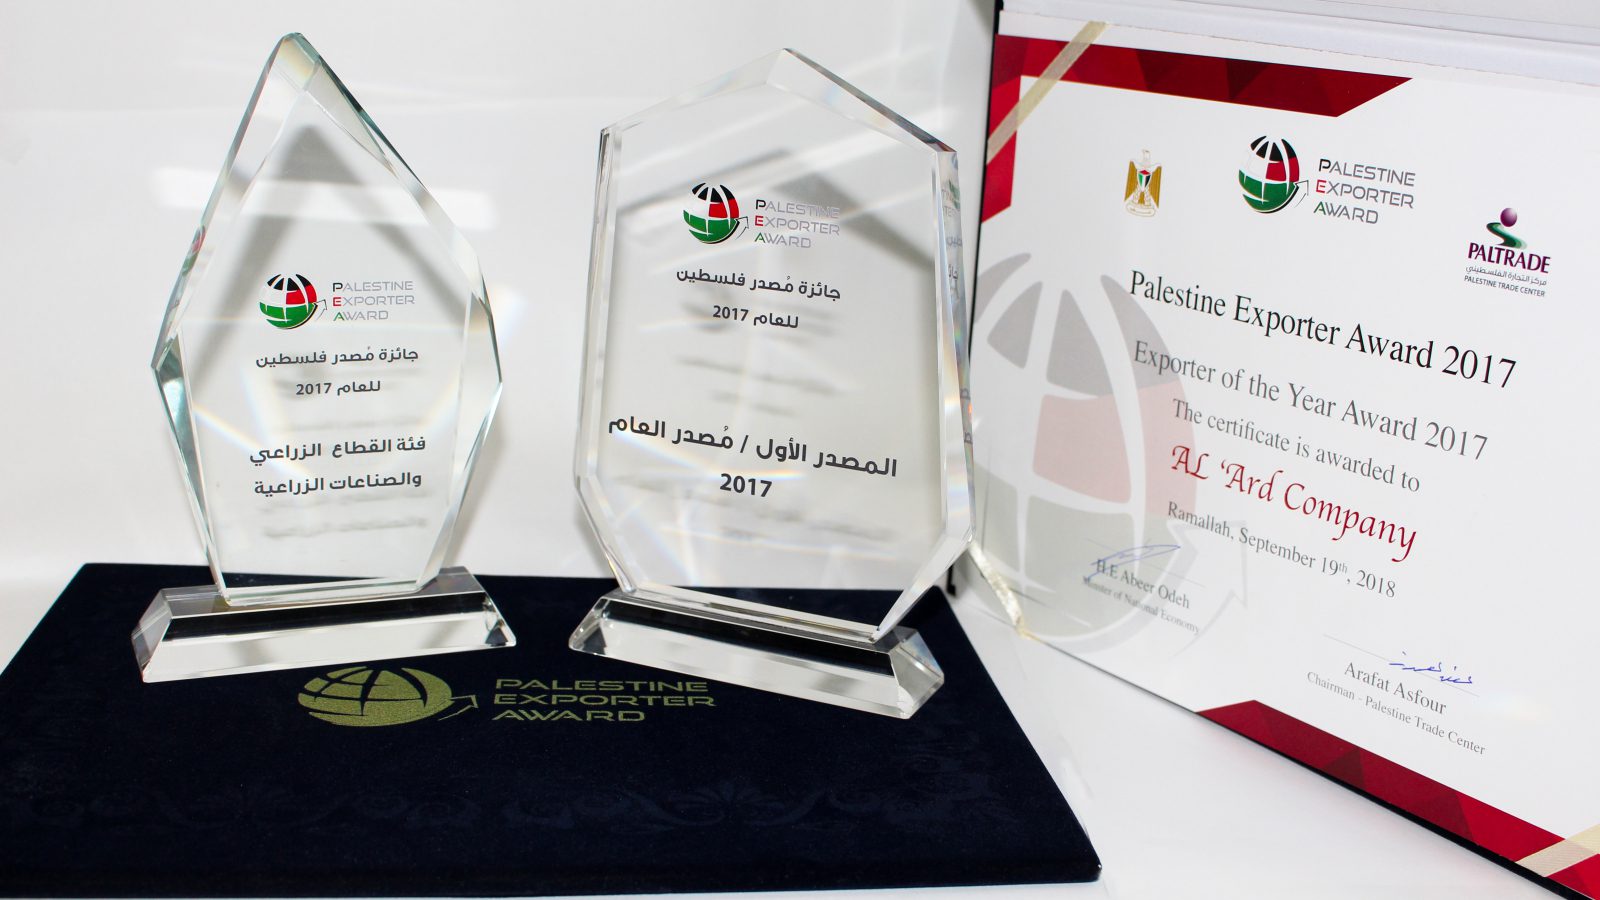 The Palestinian company Al Ard received two awards this year as the largest Palestinian exporter of oil and agricultural products.